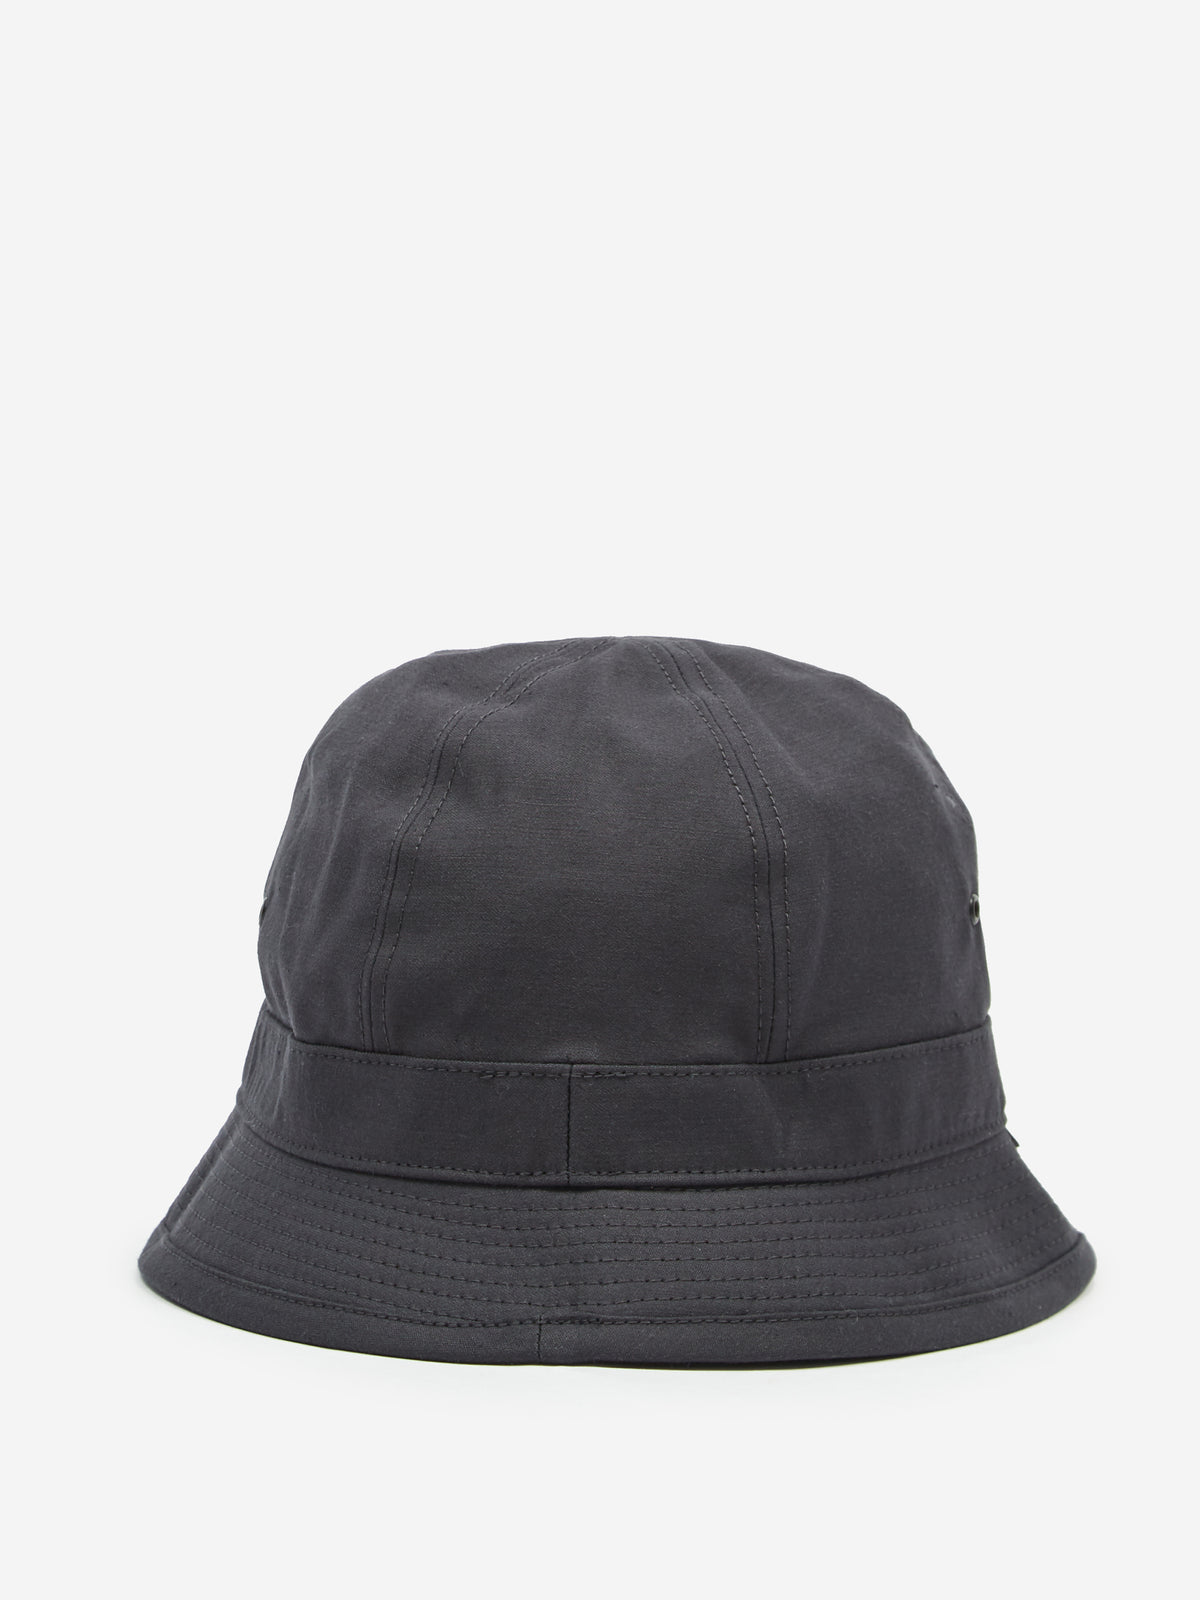 Select from our vast selection of Neighborhood MIL Ball / C Hat